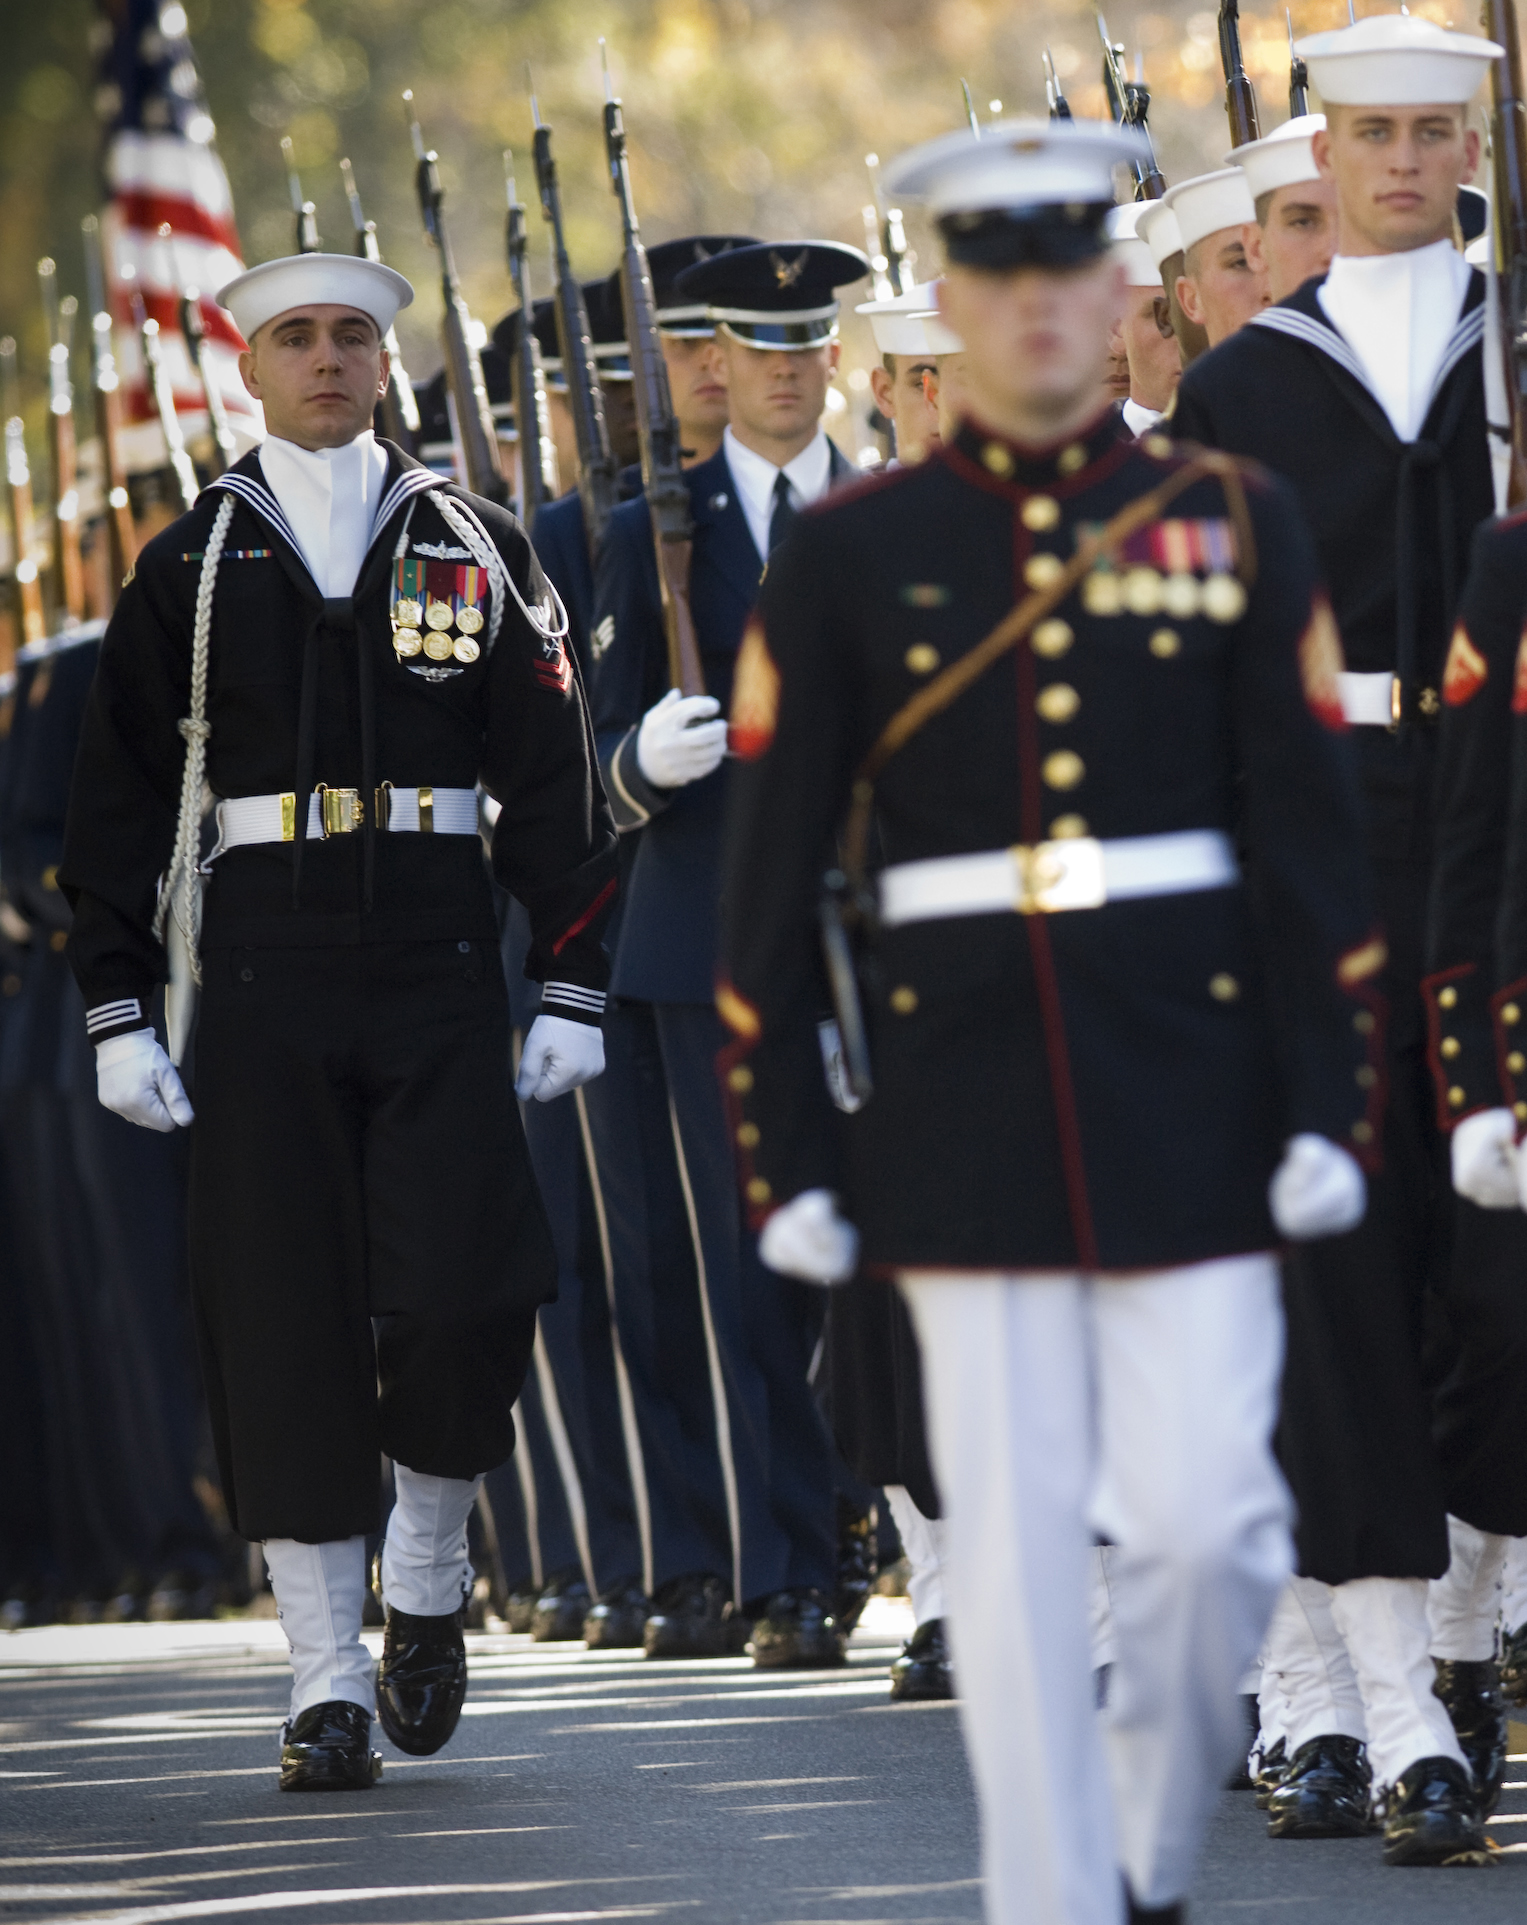 A joint service honor guard escorts the casket of Adm. William J. Crowe ...